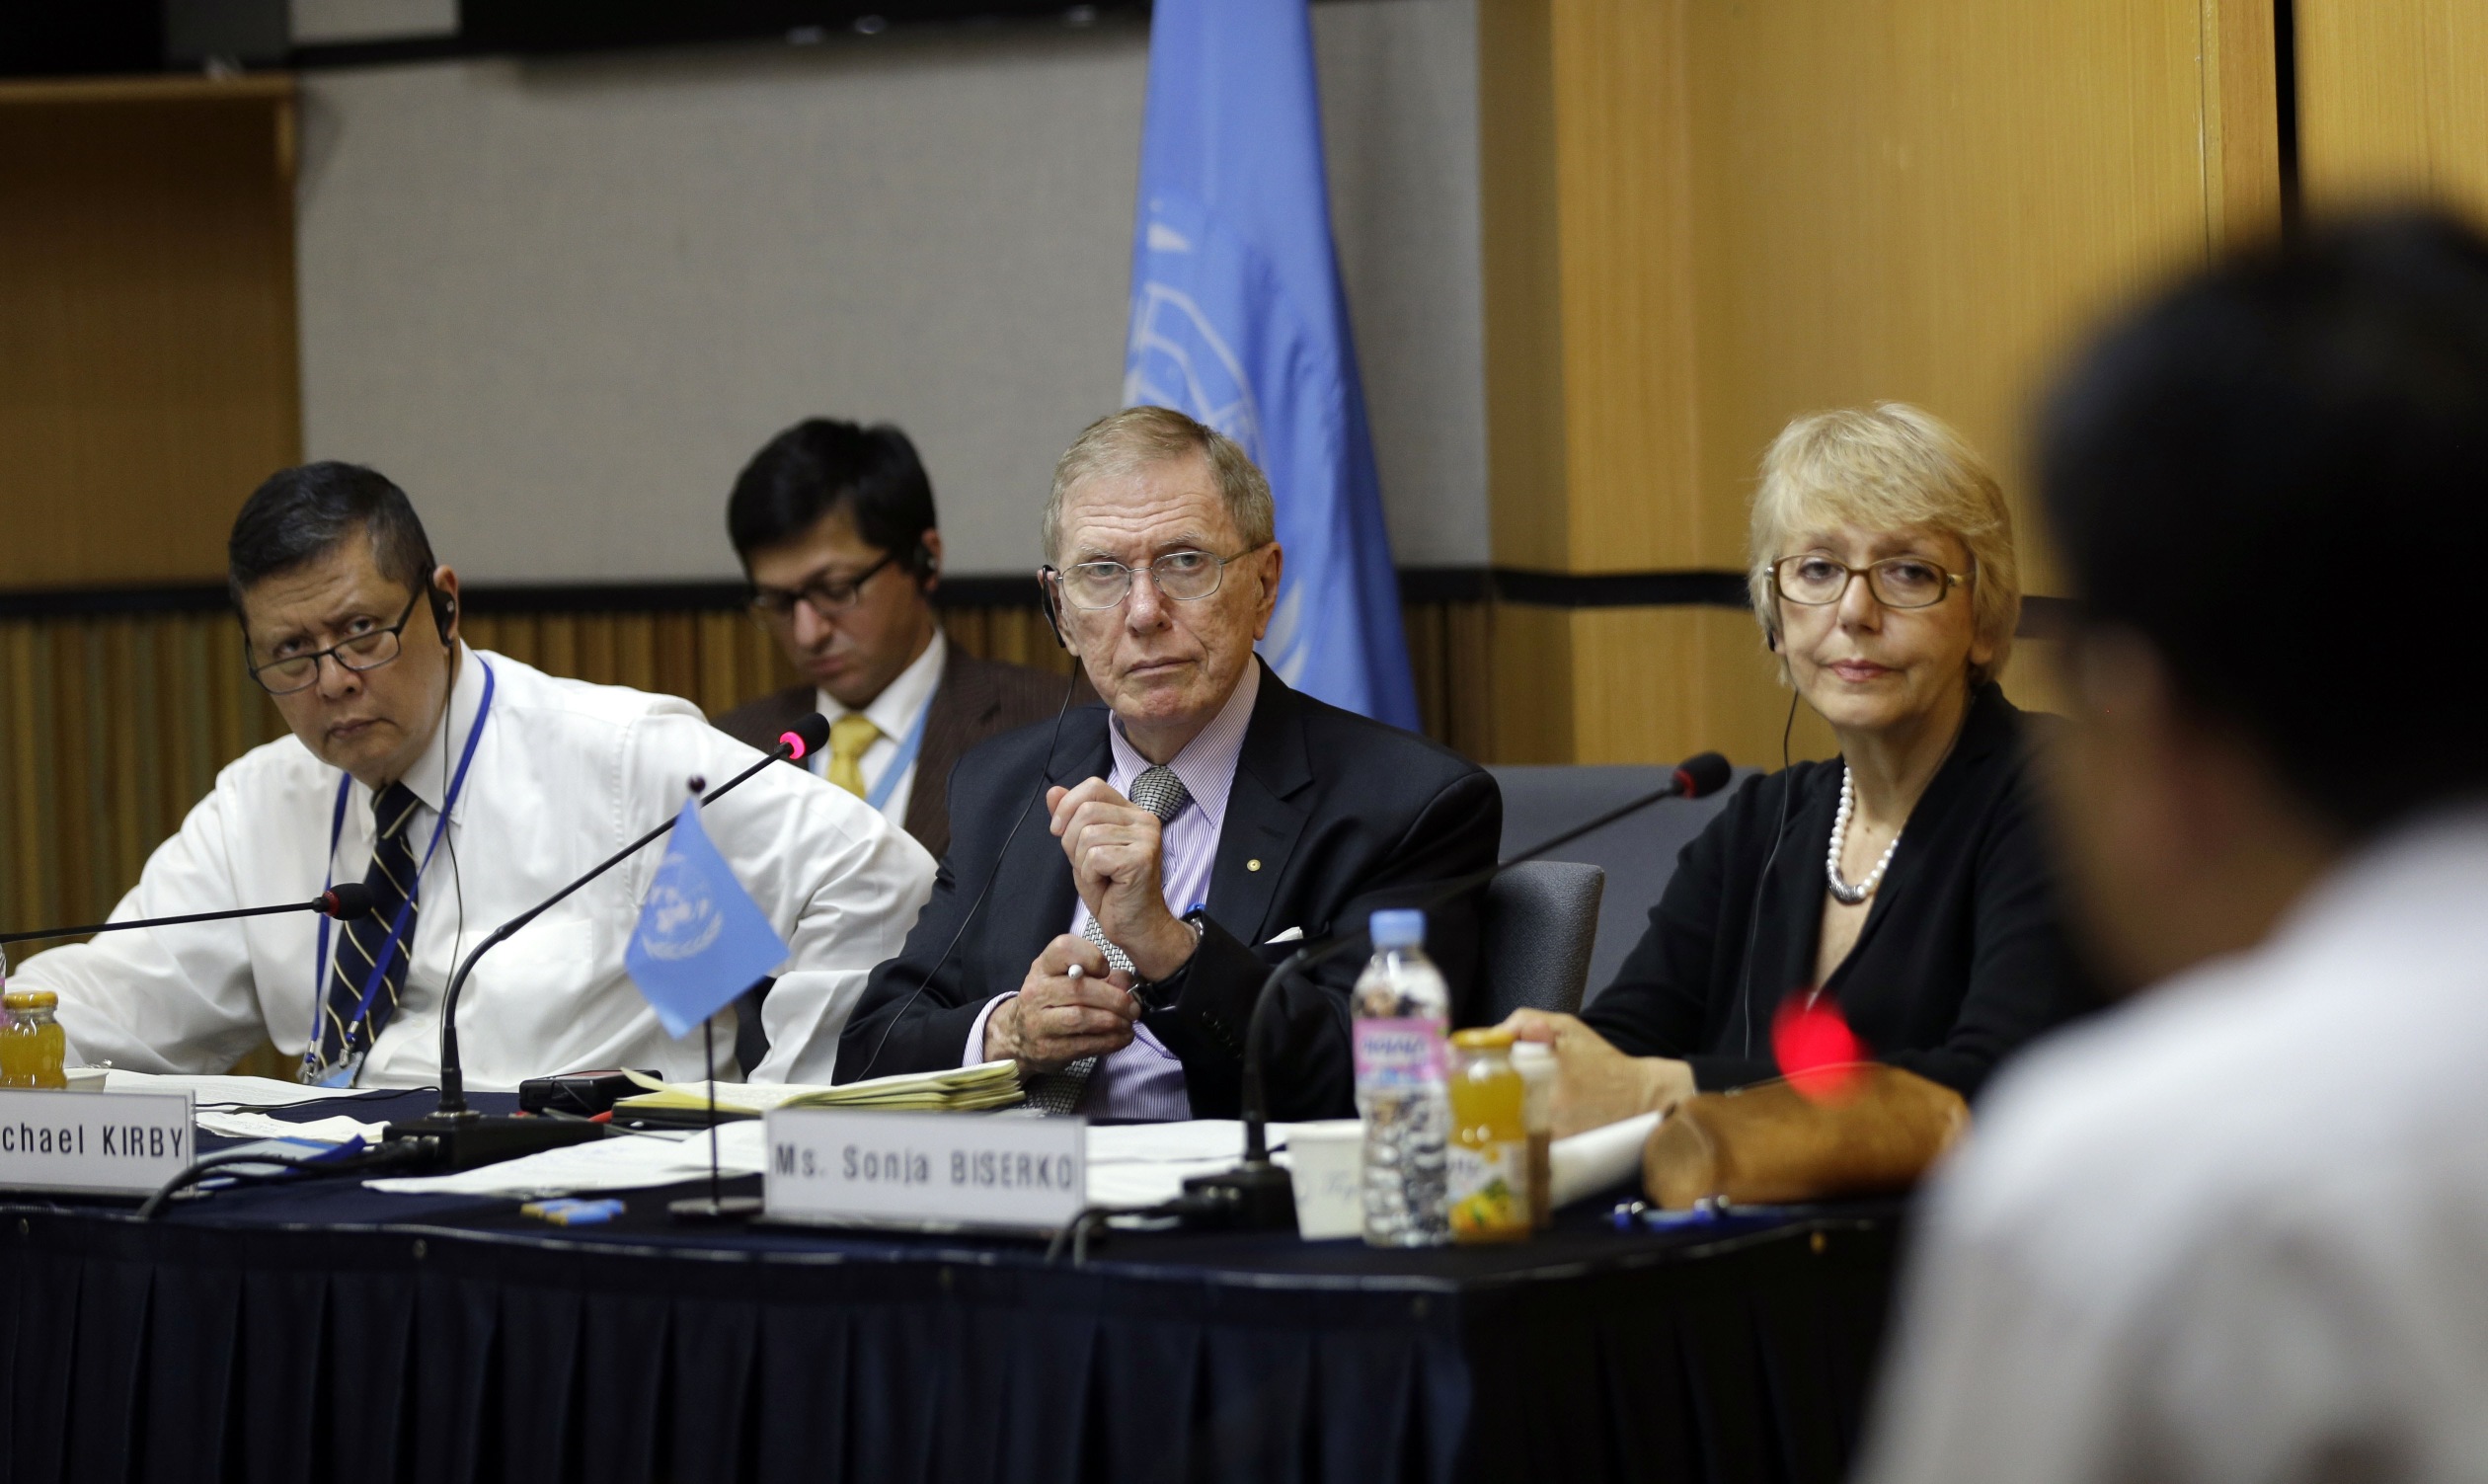 Michael Donald Kirby (centre) the chairman of the UN commission of Inquiry on human rights in North Korea, listens to Ahn Myung-chul, right, who worked as a guard at political prisoner camps in North Korea. Photo: AP